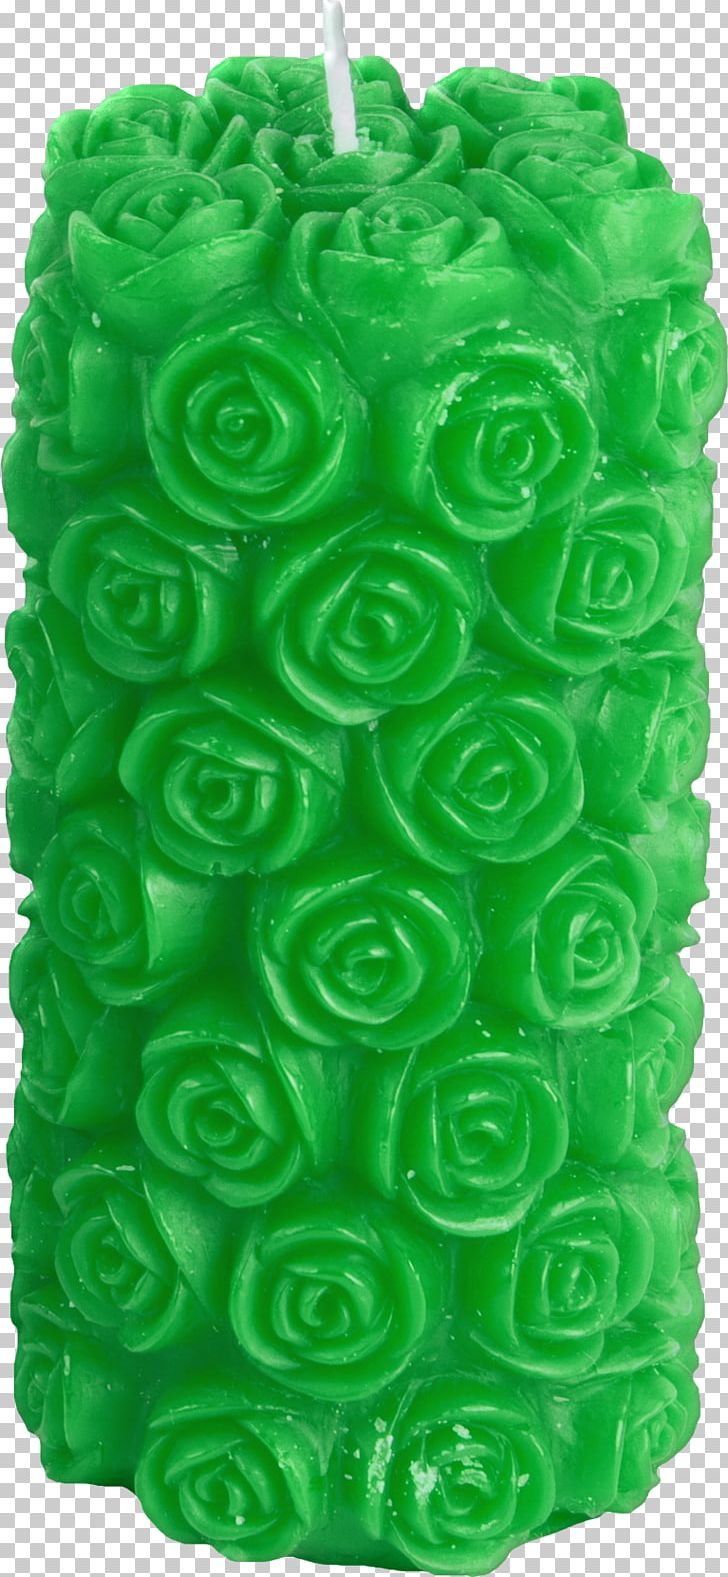 Ubon Ratchathani Candle Festival Beach Rose Green PNG, Clipart, Background Green, Candle, Color, Download, Encapsulated Postscript Free PNG Download